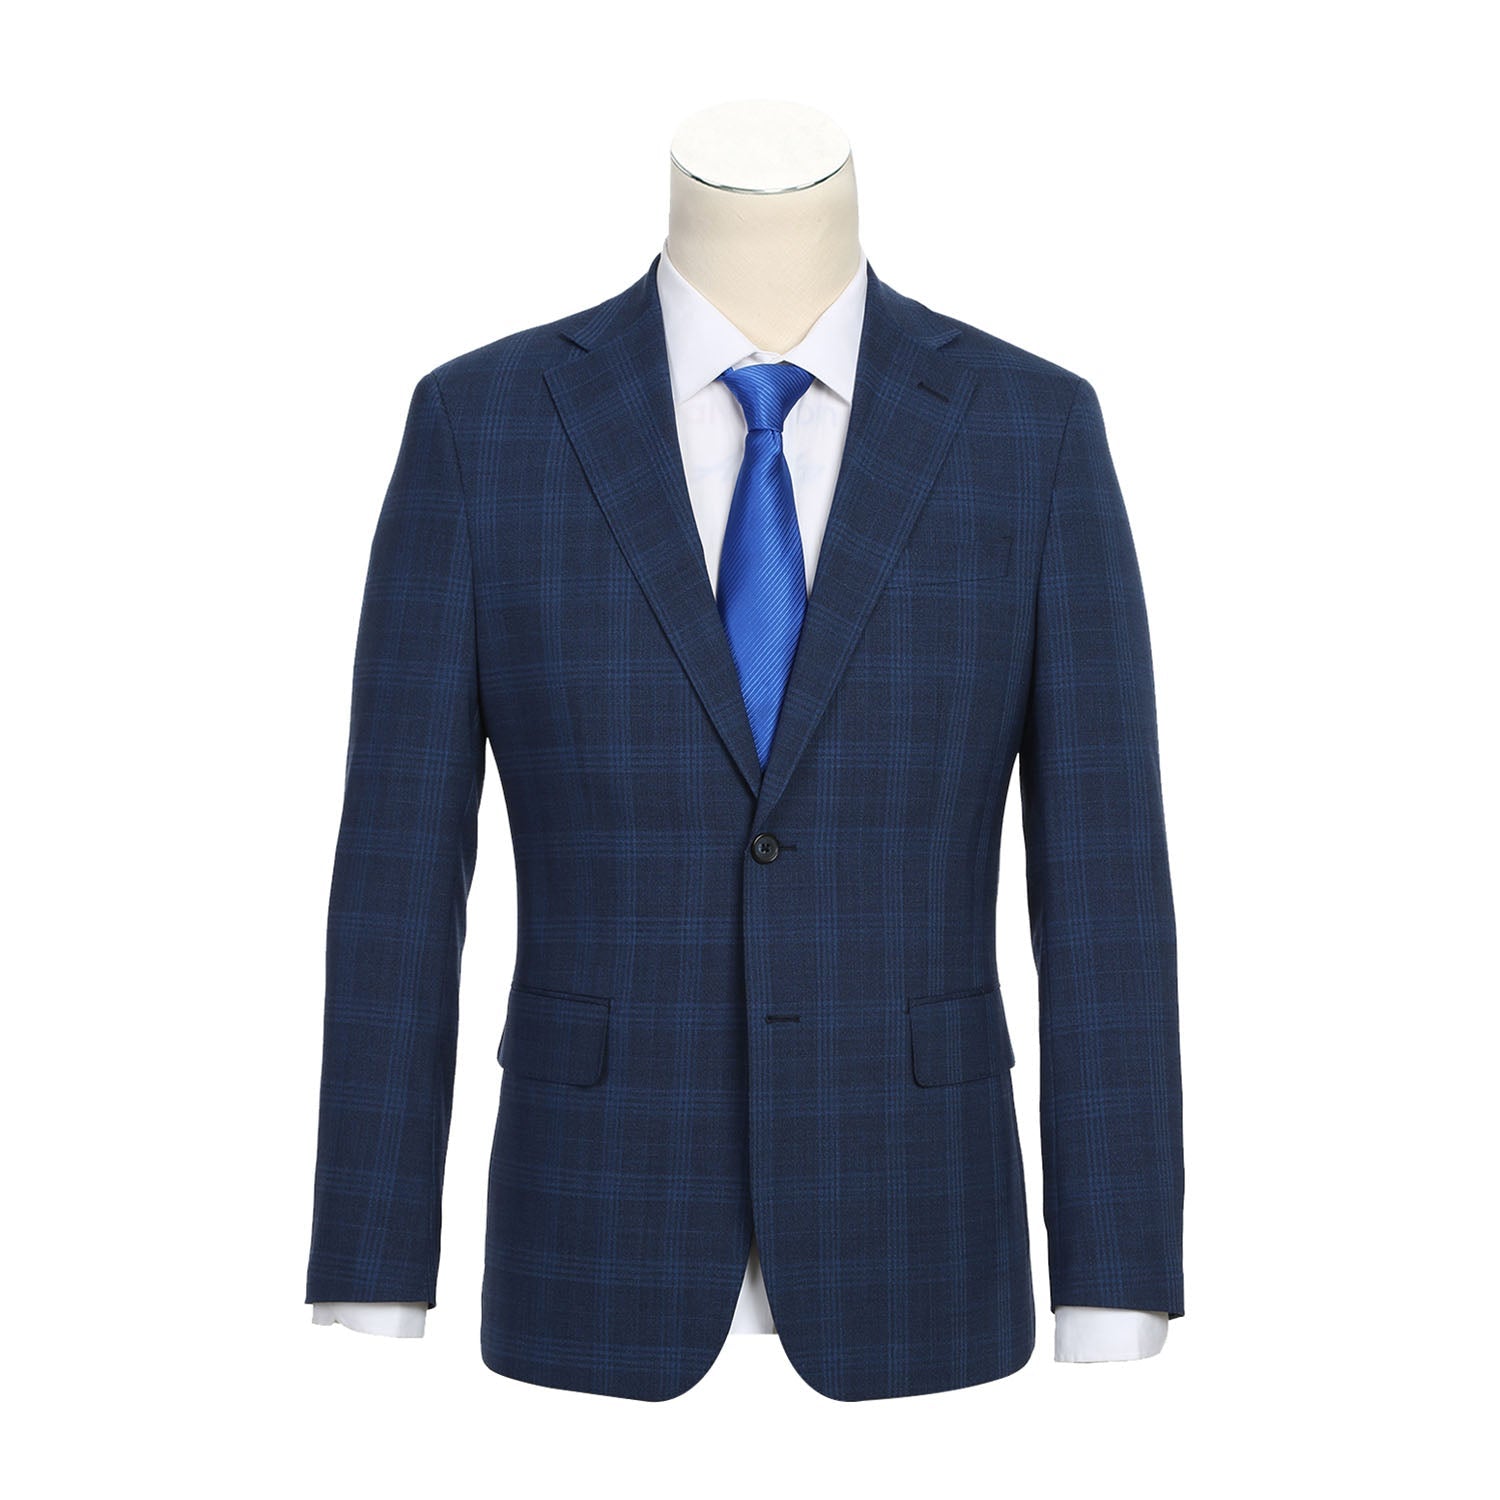 English Laundry Air Force Blue Plaid Wool Suit 1